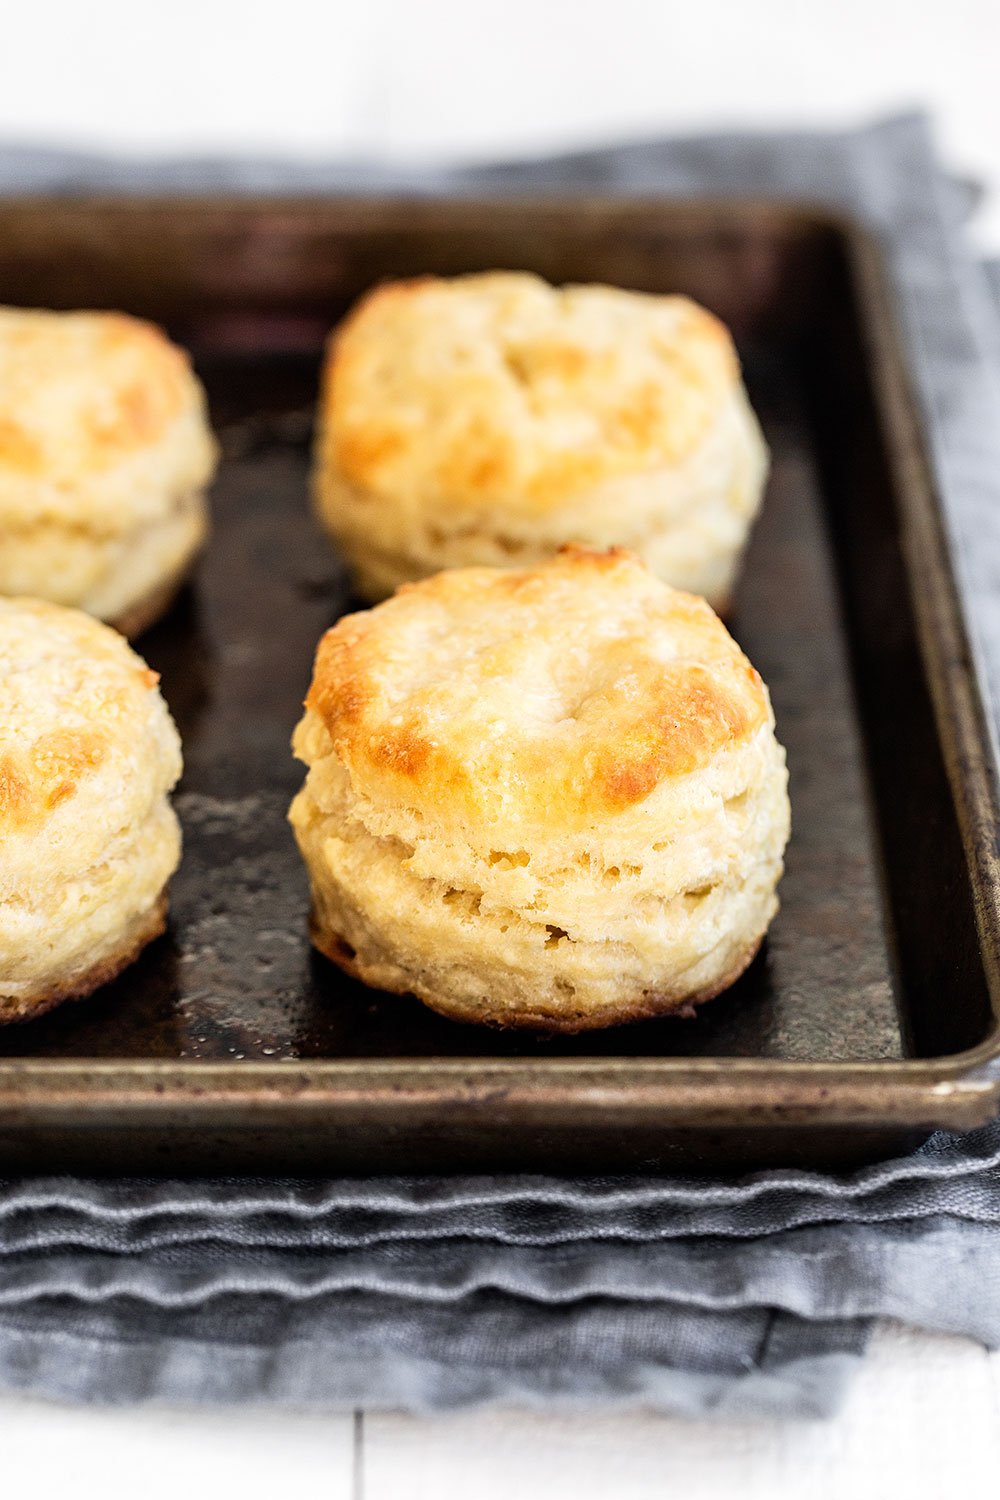 Tray of baked golden brown buttermilk biscuits